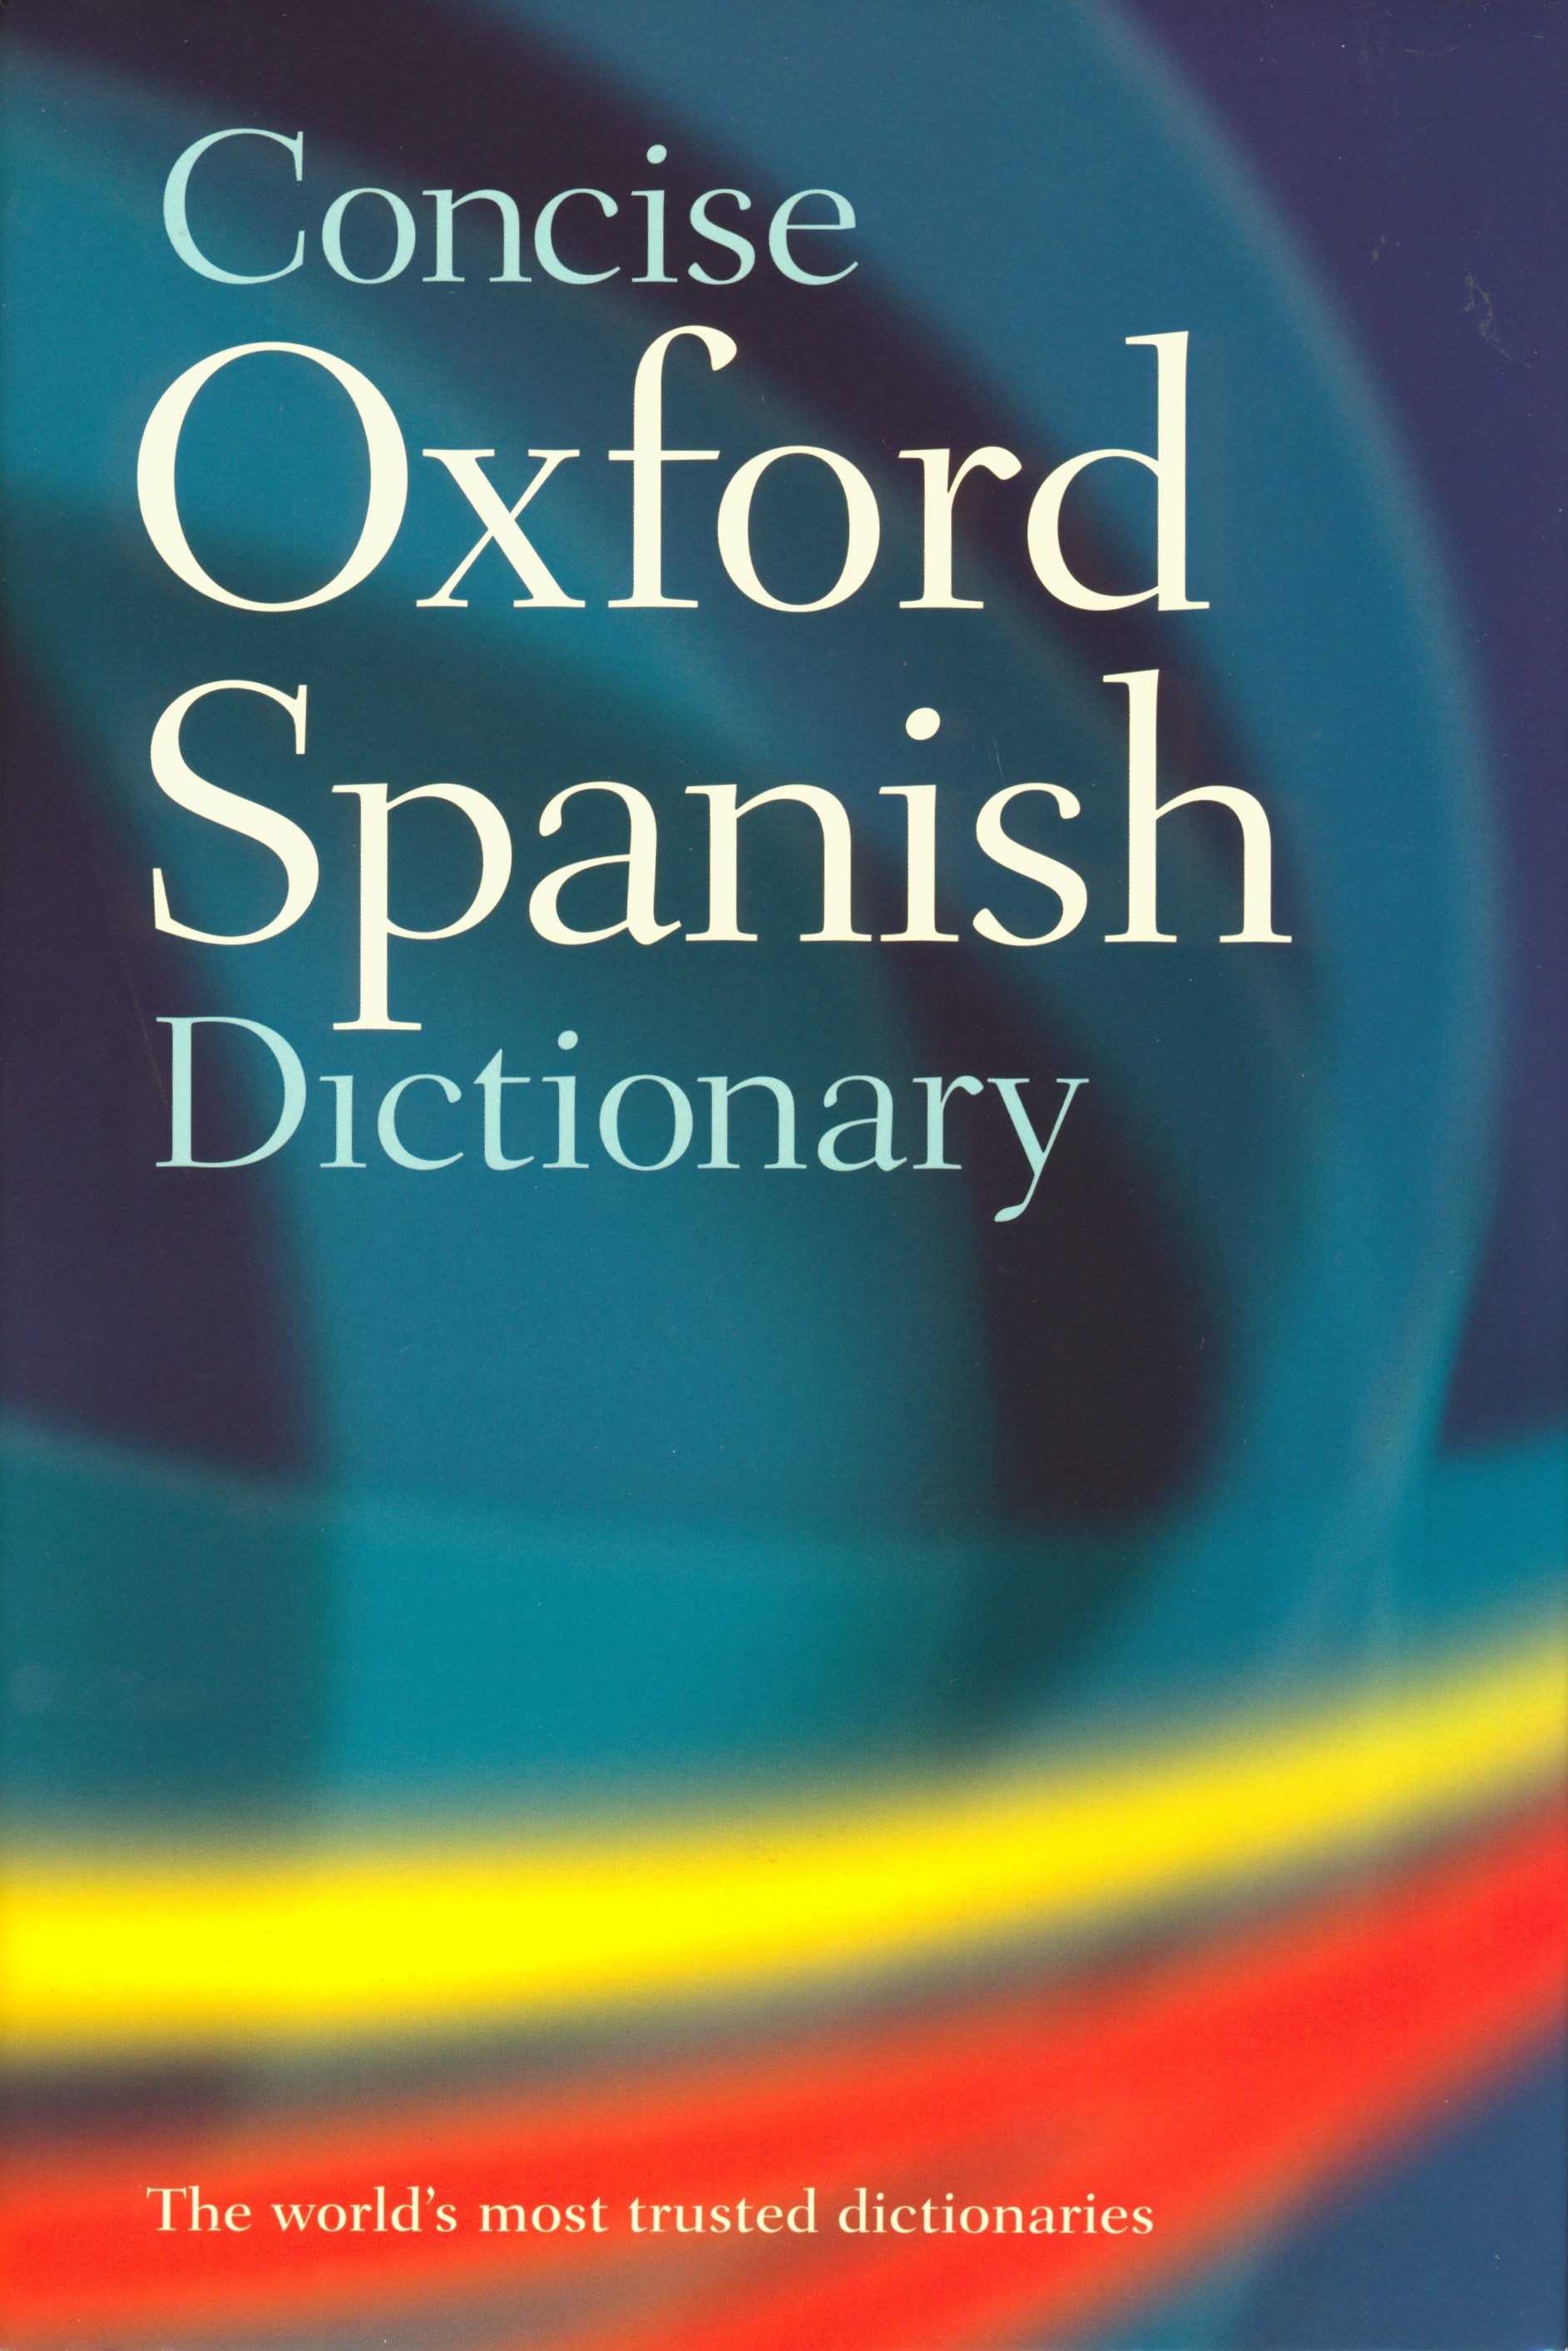 Spanish Concise Oxford Dictionary